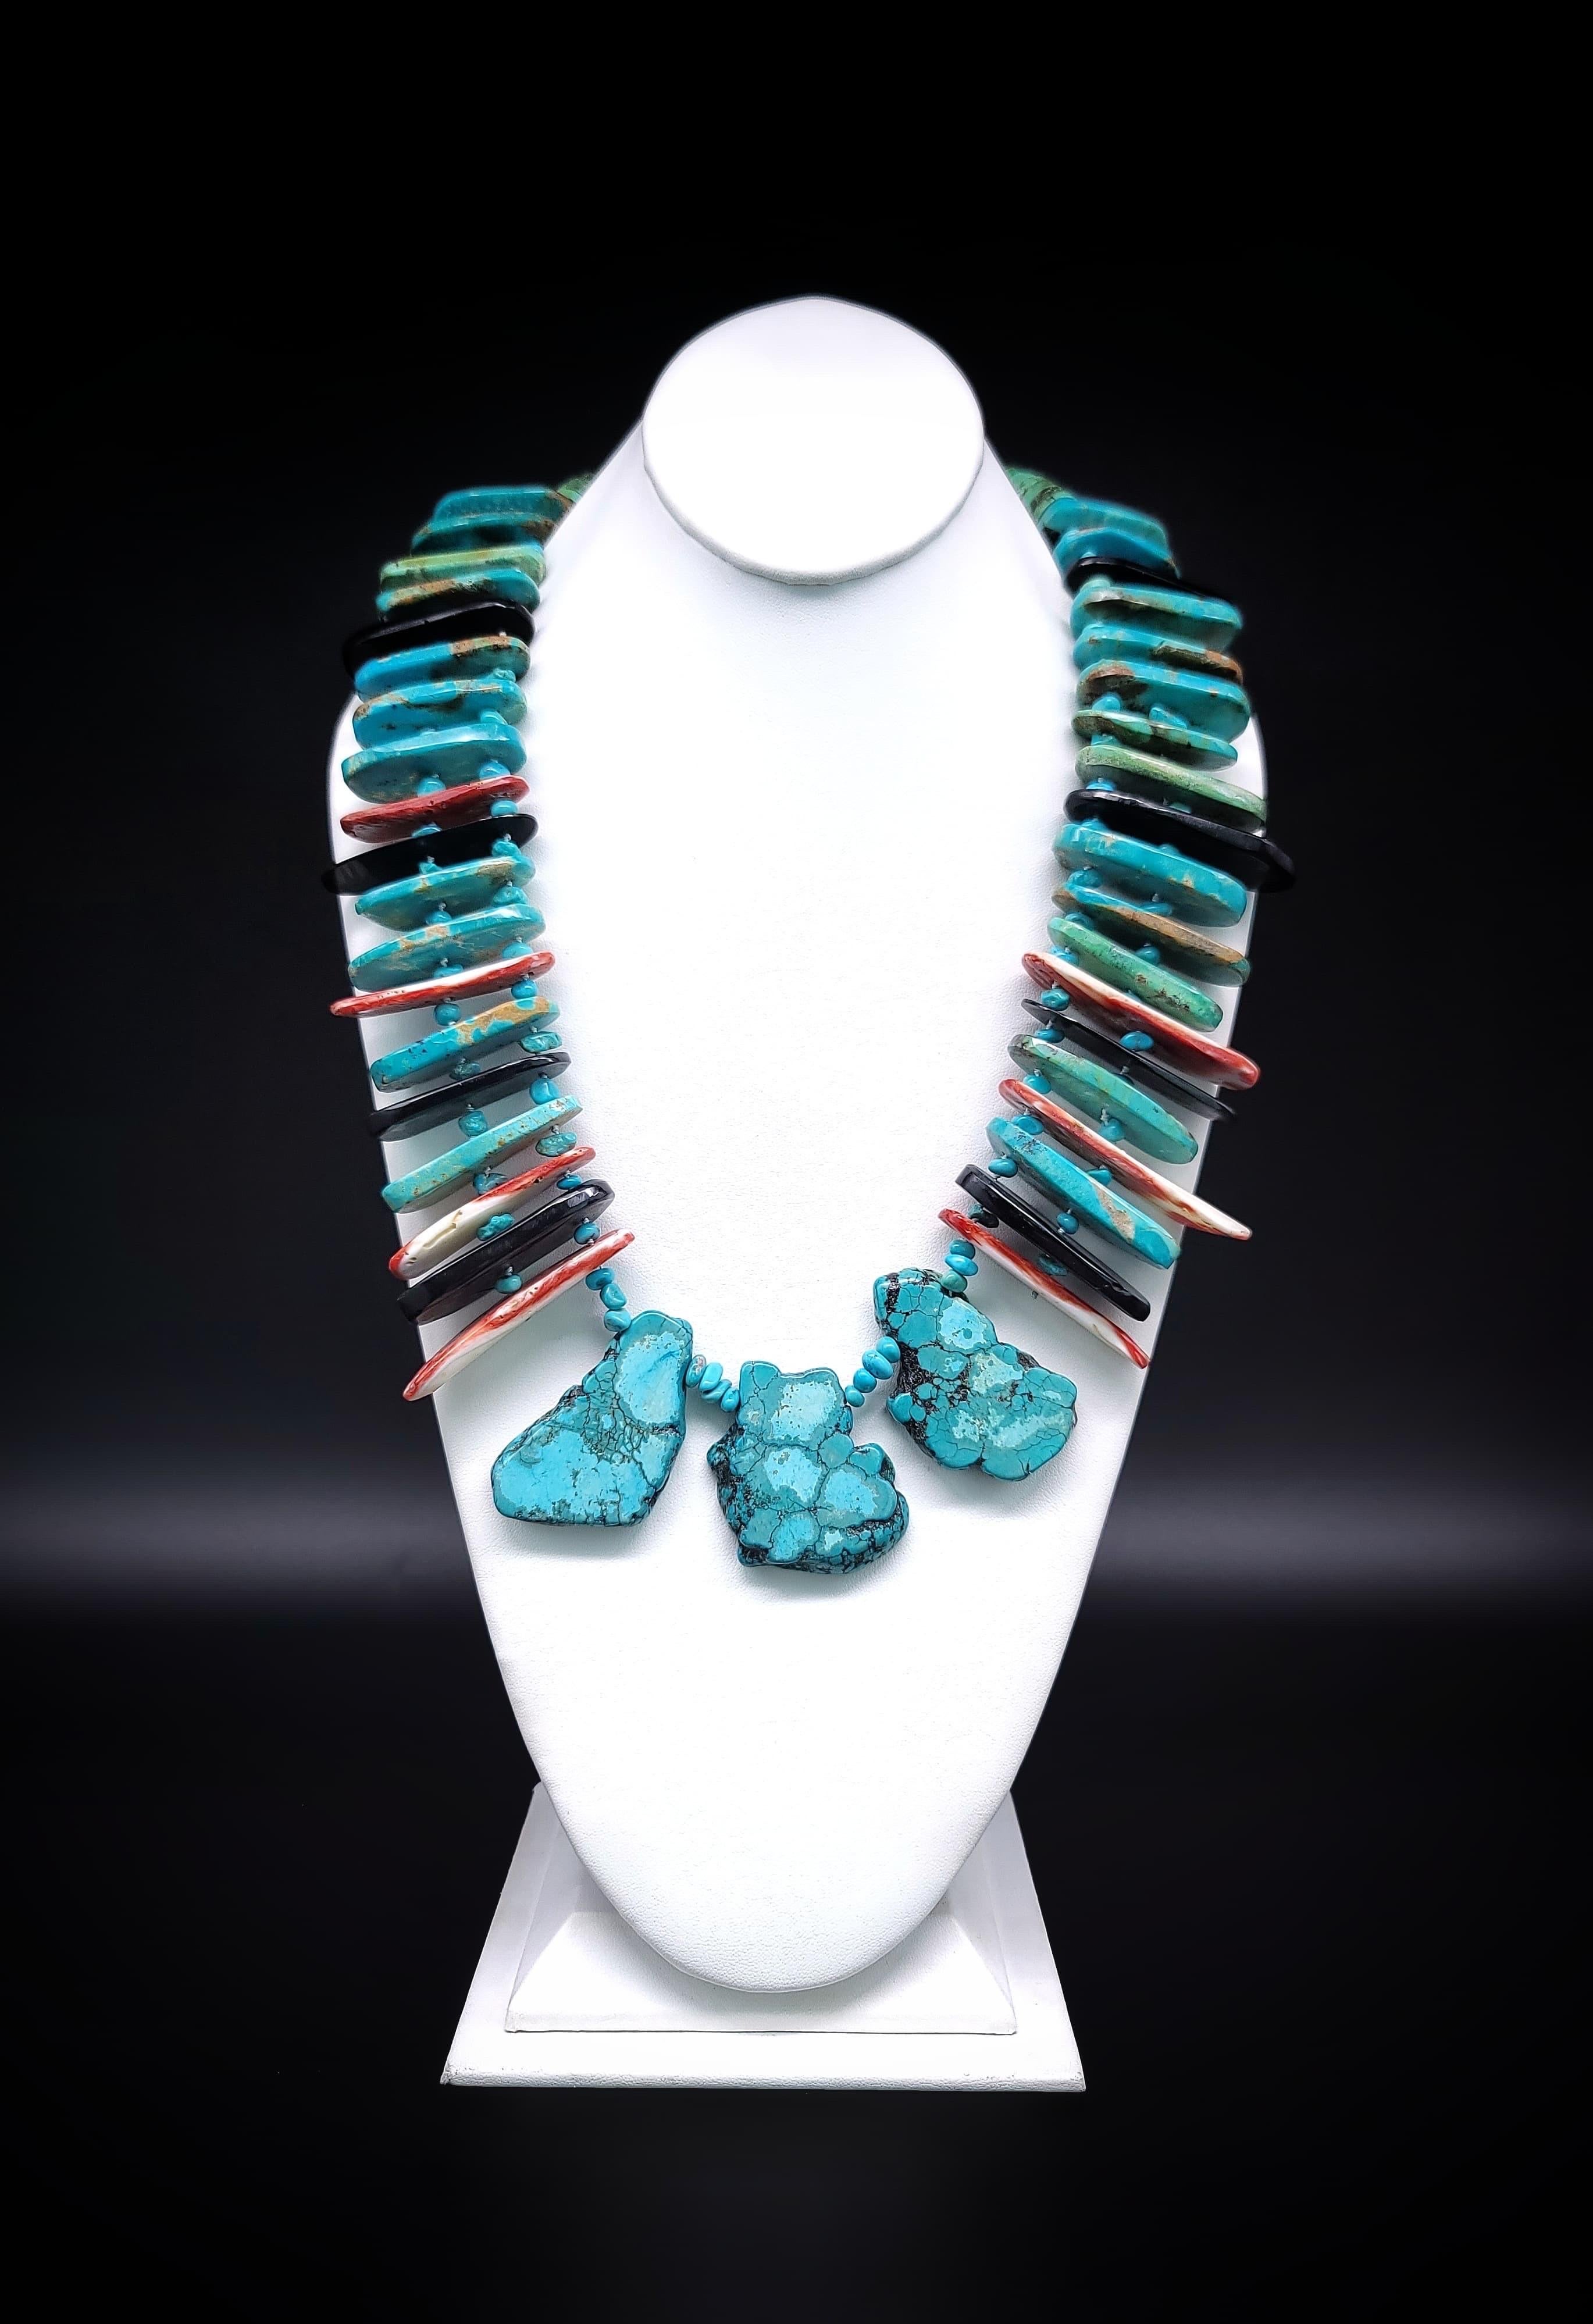 Introducing our latest one-of-a-kind piece, a truly stunning necklace that is sure to turn heads. This necklace is a real hummer, featuring unique components collected from the Southwest United States, making it a truly special and unique